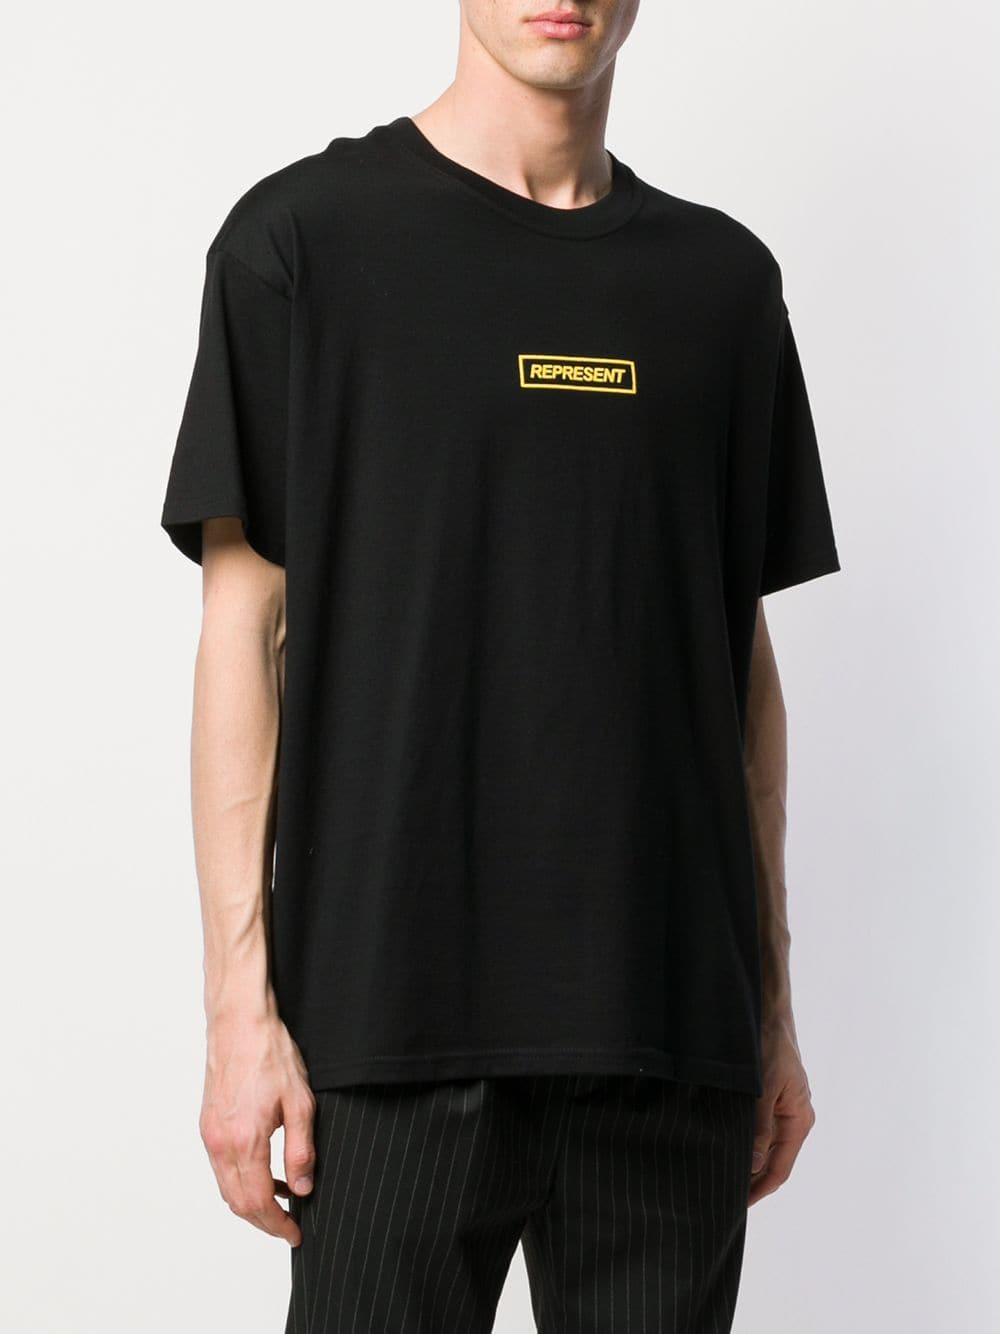 Represent Cotton Loose Fit T-shirt in Black for Men - Lyst